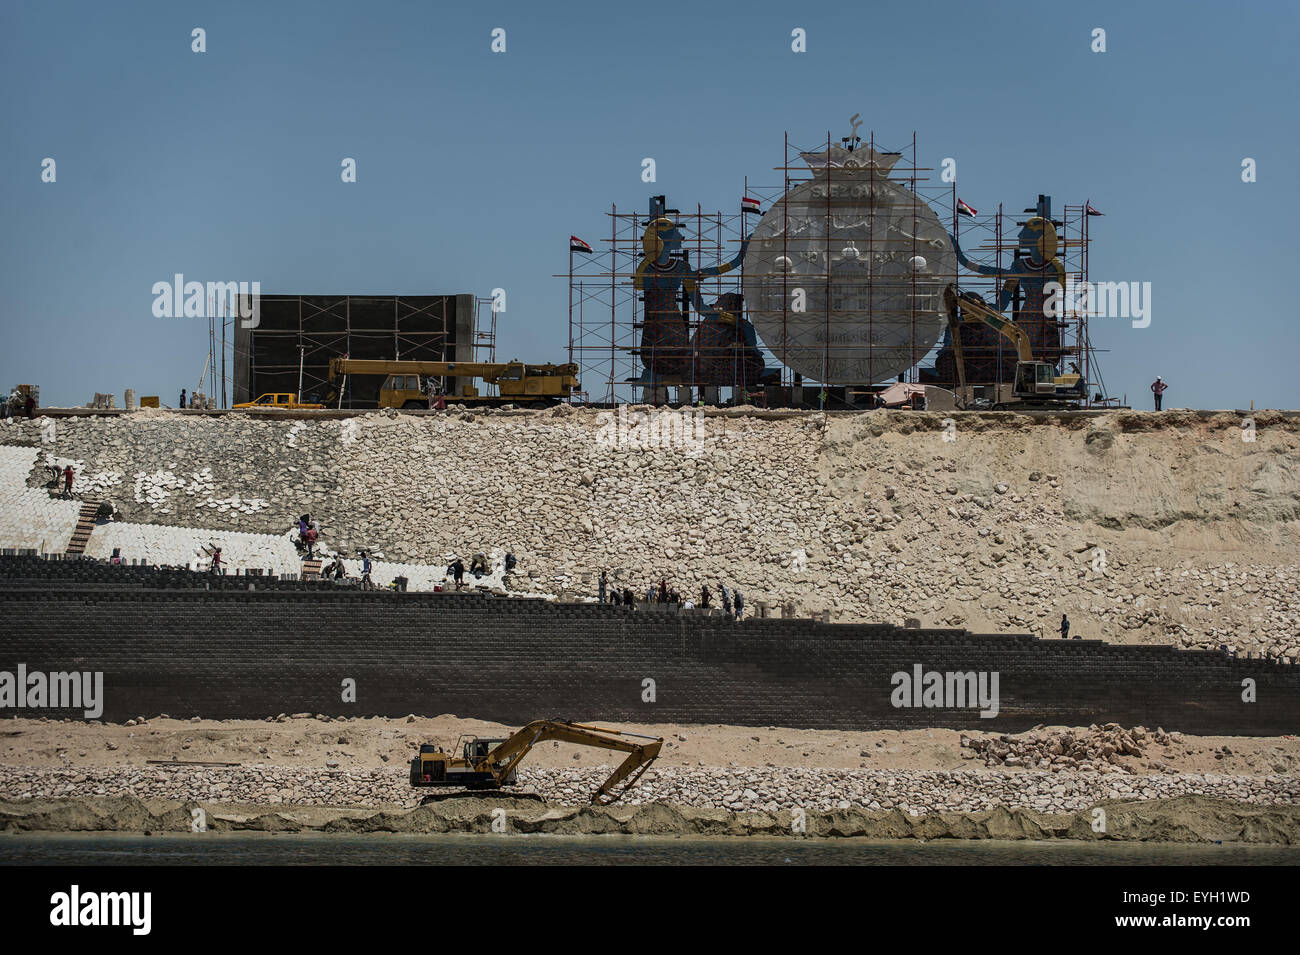 Ismailia, Egypt. 29th July, 2015. Workers are seen on the construction site of the new Suez Canal in Ismailia, a port city in Egypt, on July 29, 2015. The dredging work of Egypt's "New Suez Canal" has been completed and the waterway is ready as well as safe for huge ship navigation, Mohab Memish, head of the Suez Canal Authority (SCA), told reporters in a press conference Wednesday. © Pan Chaoyue/Xinhua/Alamy Live News Stock Photo